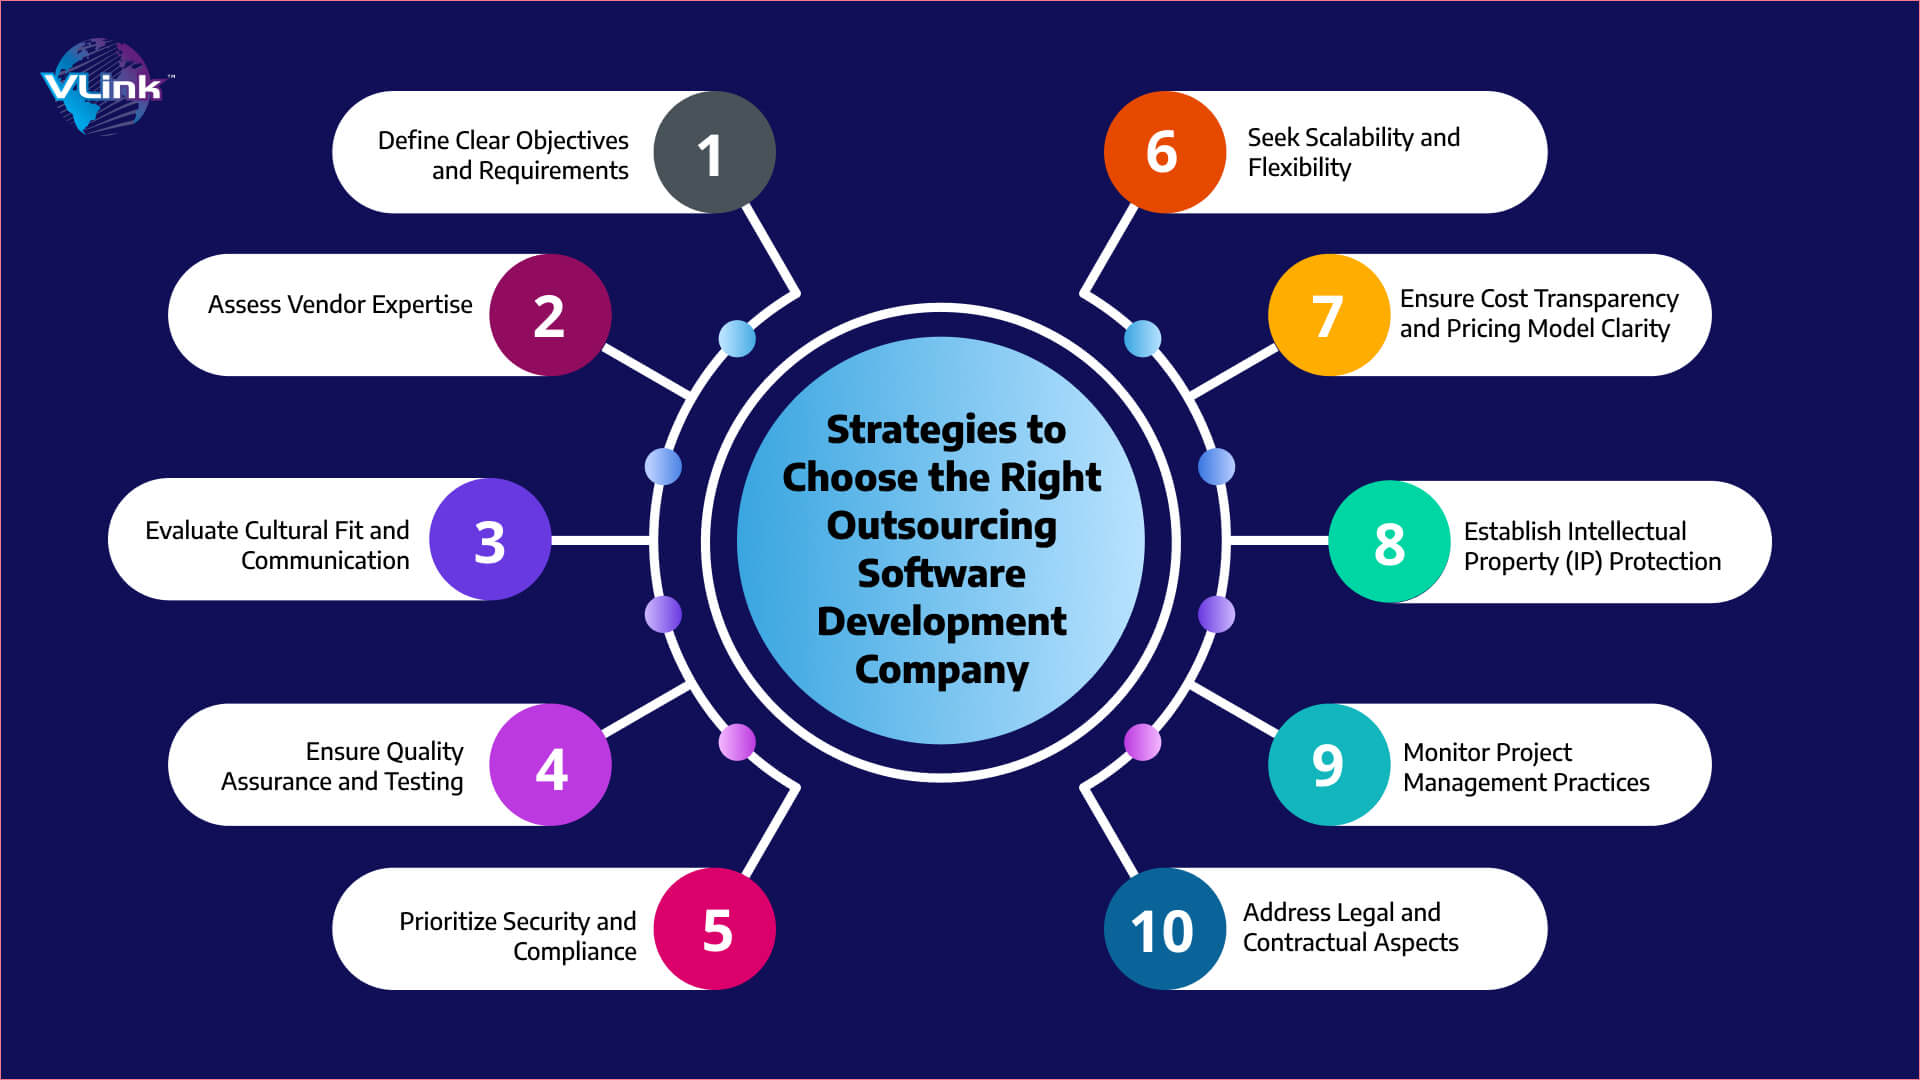 Strategies to Choose the Right Outsourcing Software Development Company